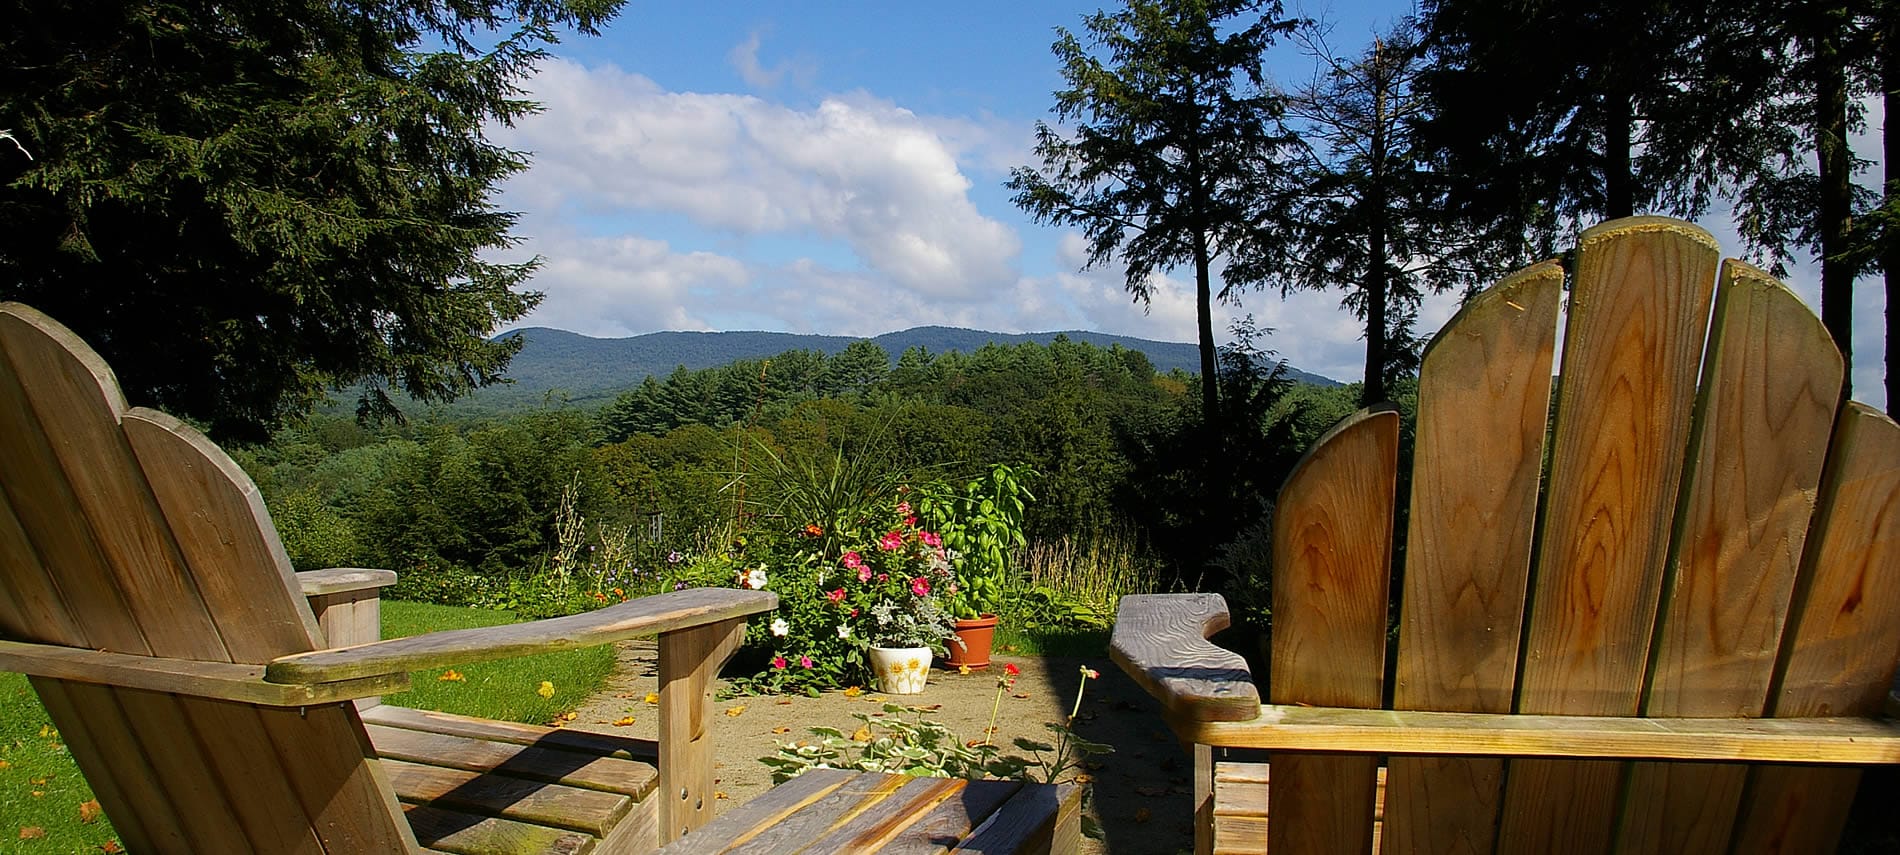 Two wooden Adirondack chairs looking toward the distant hills and trees amidst blue skies